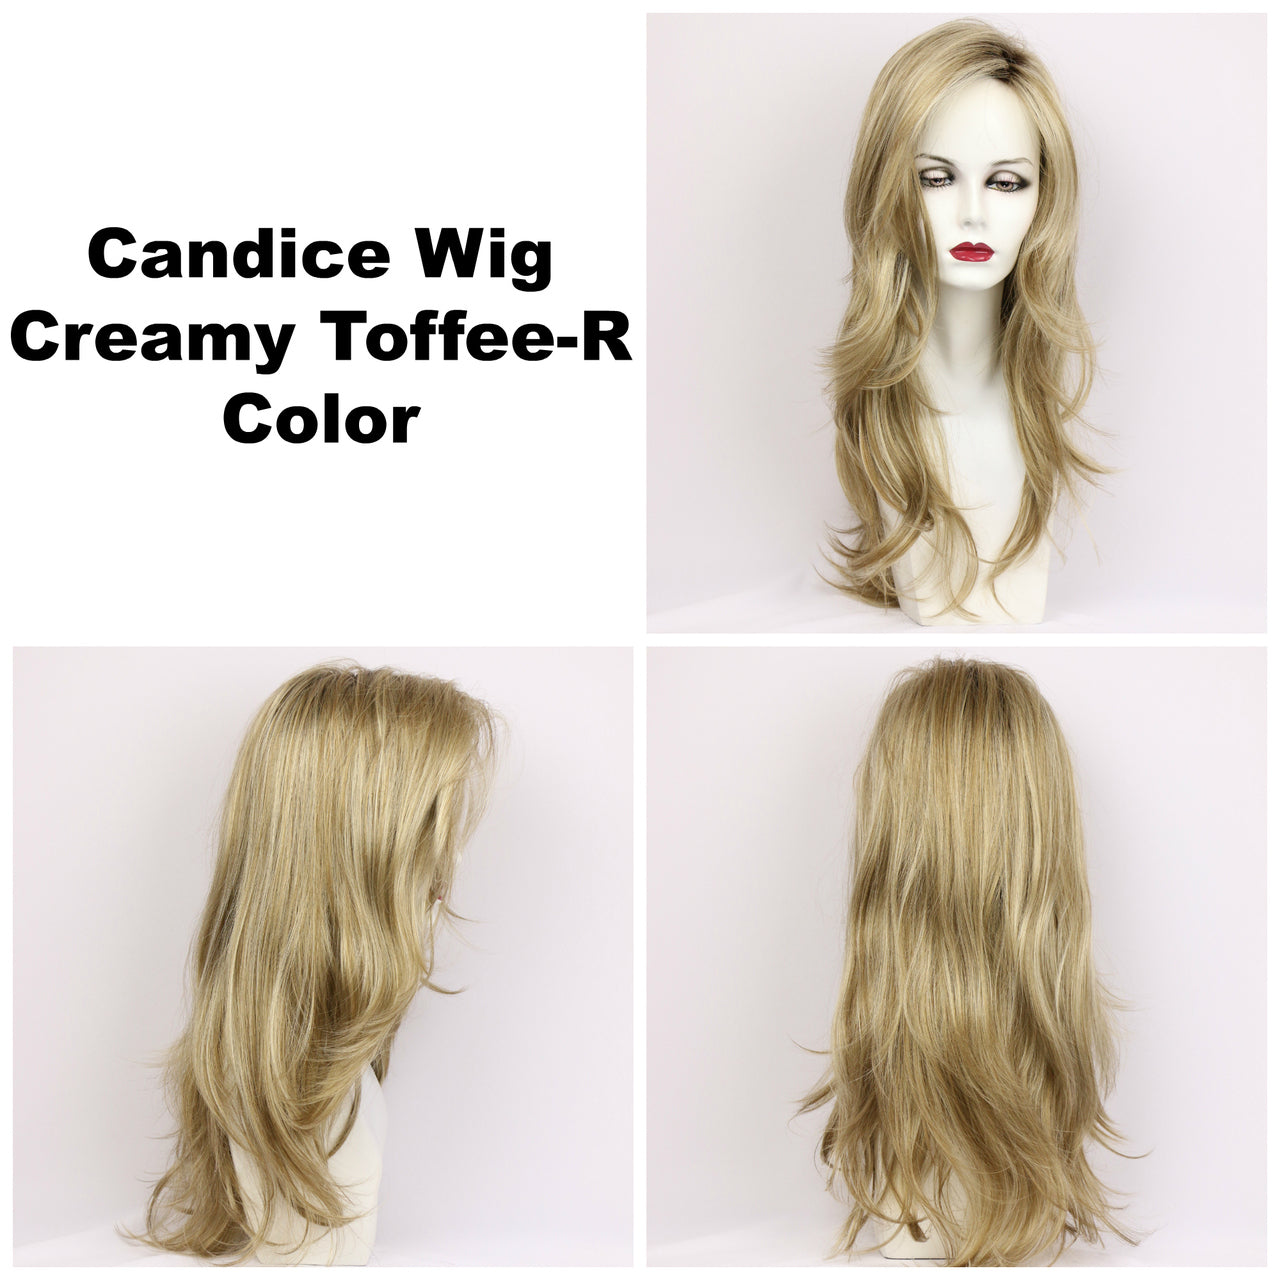 Creamy Toffee-R / Candice w/ Roots / Long Wig